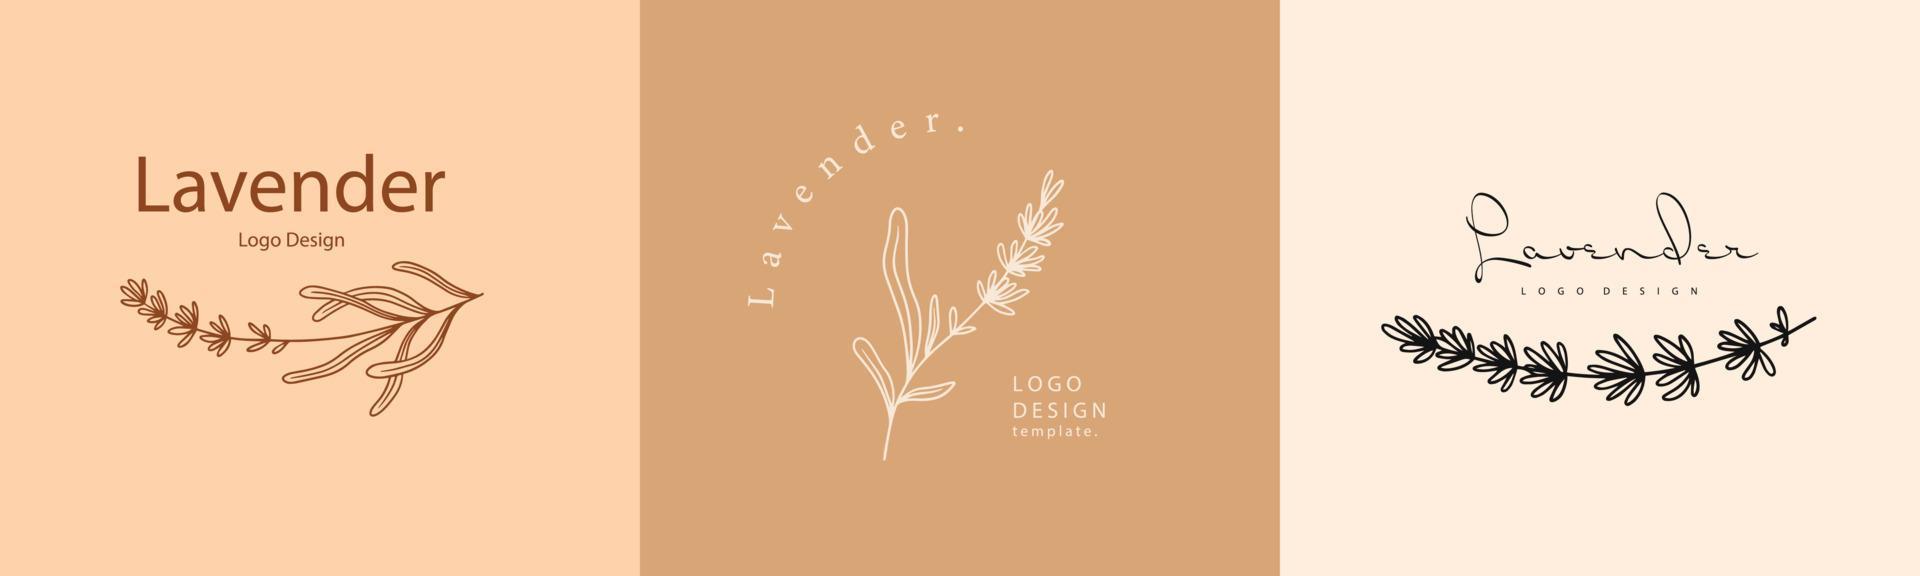 Lavender floral badges and logo. Stamp labels for tag with isolated lavender flower. Hand drawn natural sign for tag product in simple rustic design. Logo design templates for vintage branding vector